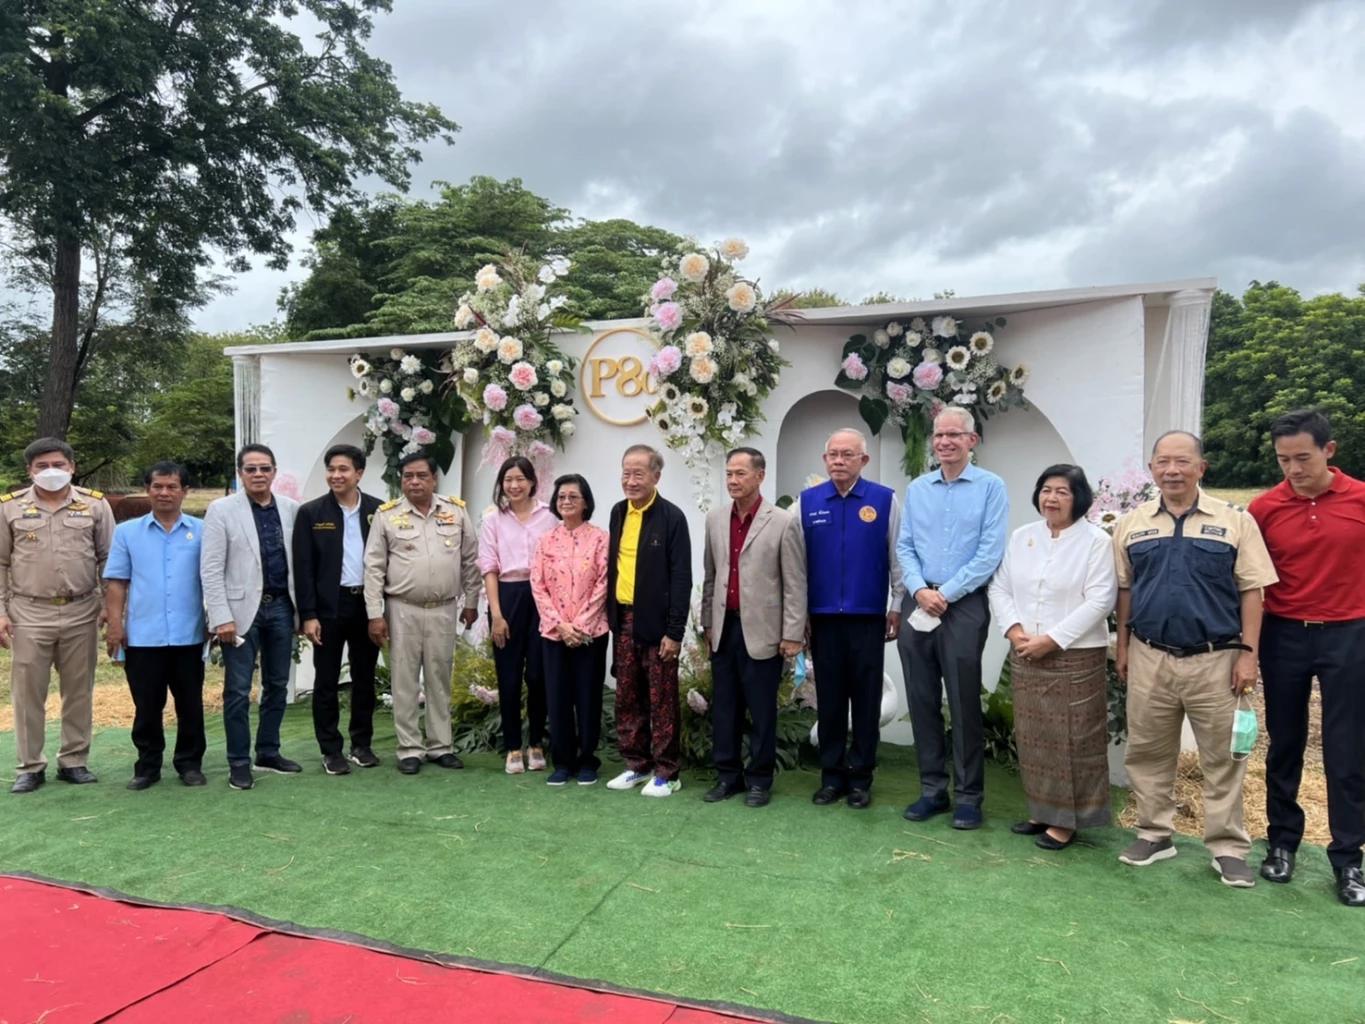 Business tycoon and industrialist Prayudh Mahagitsiri opens Teak Carbon Co., Ltd. - a vast teak plantation located in Petchaboon, aims at exporting teak products in the near future